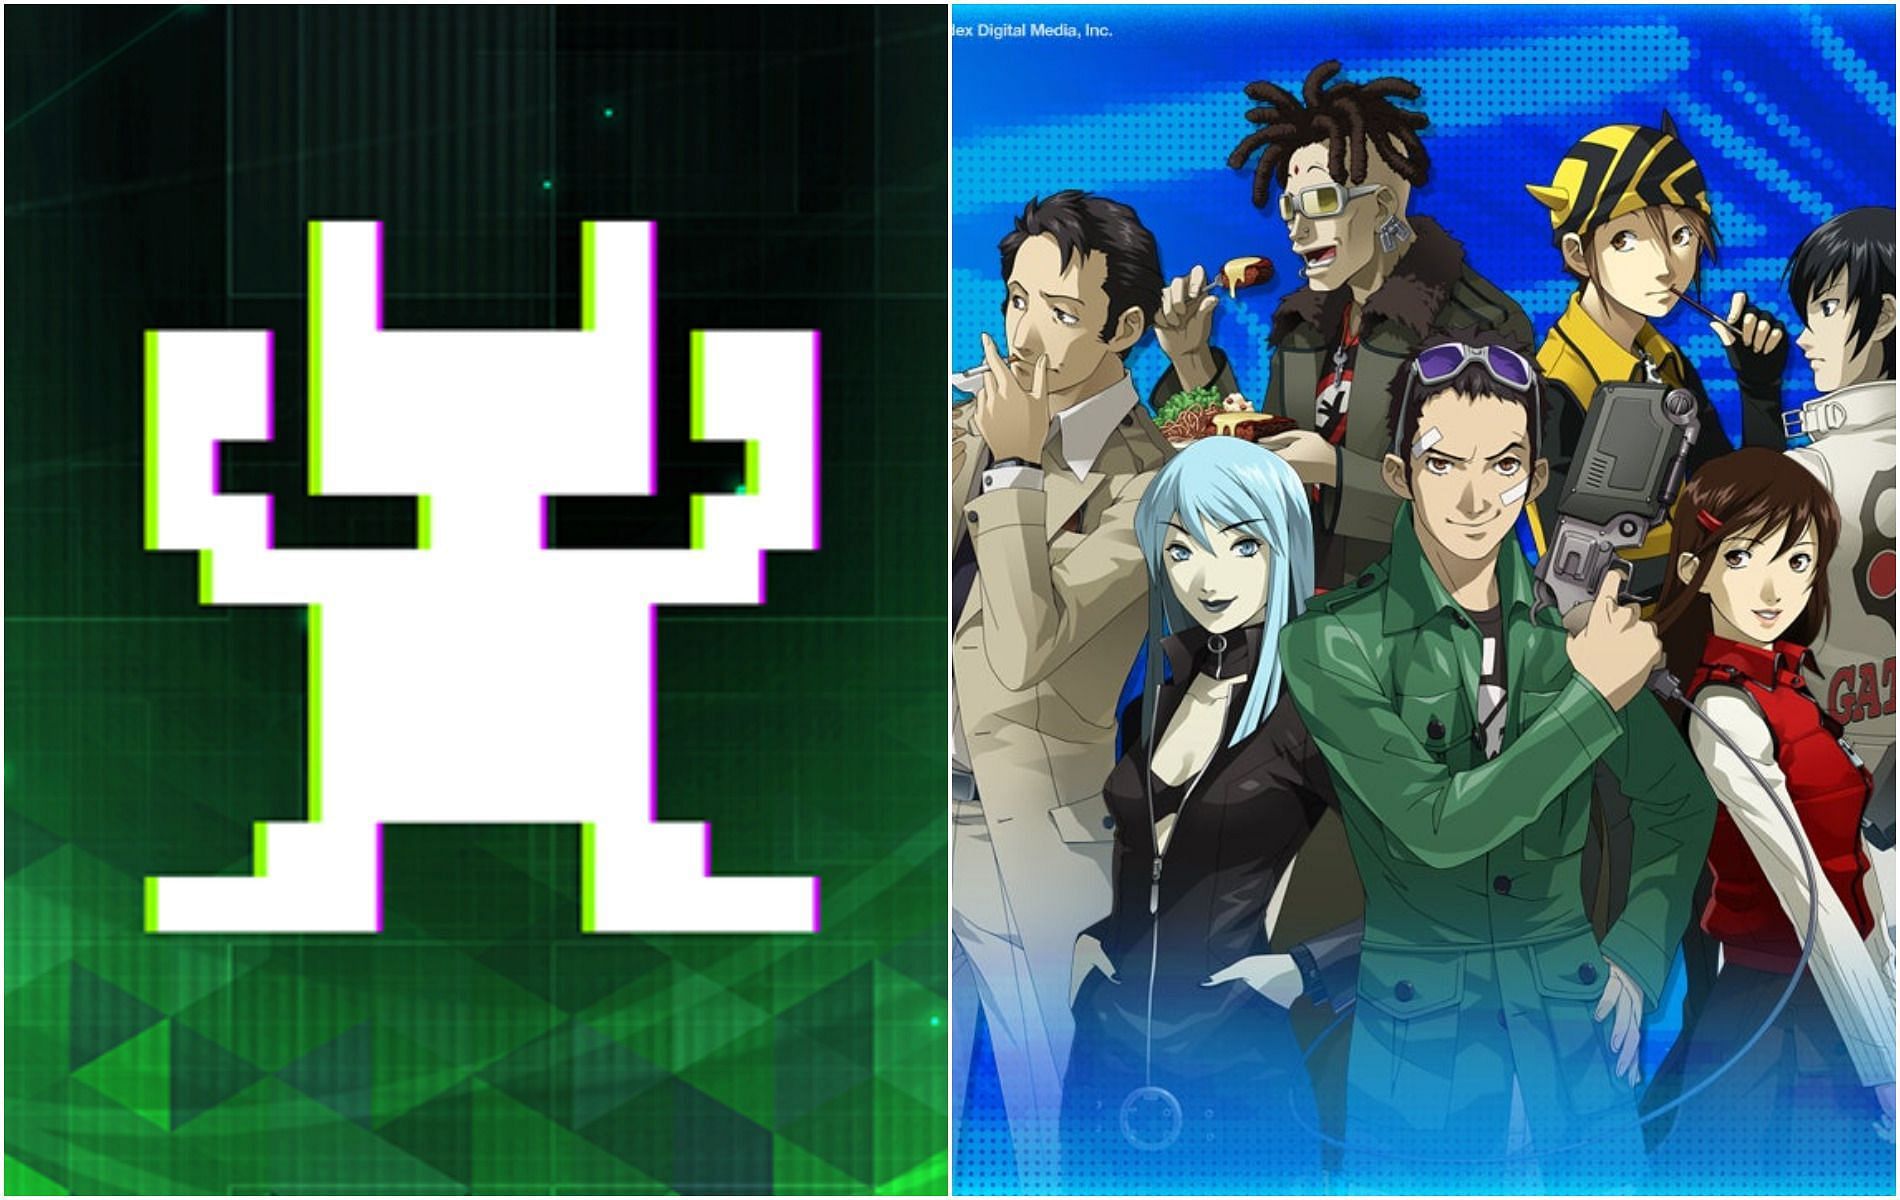 Soul Hackers 2 is a New Game in the Shin Megami Tensei Devil Summoner  Series